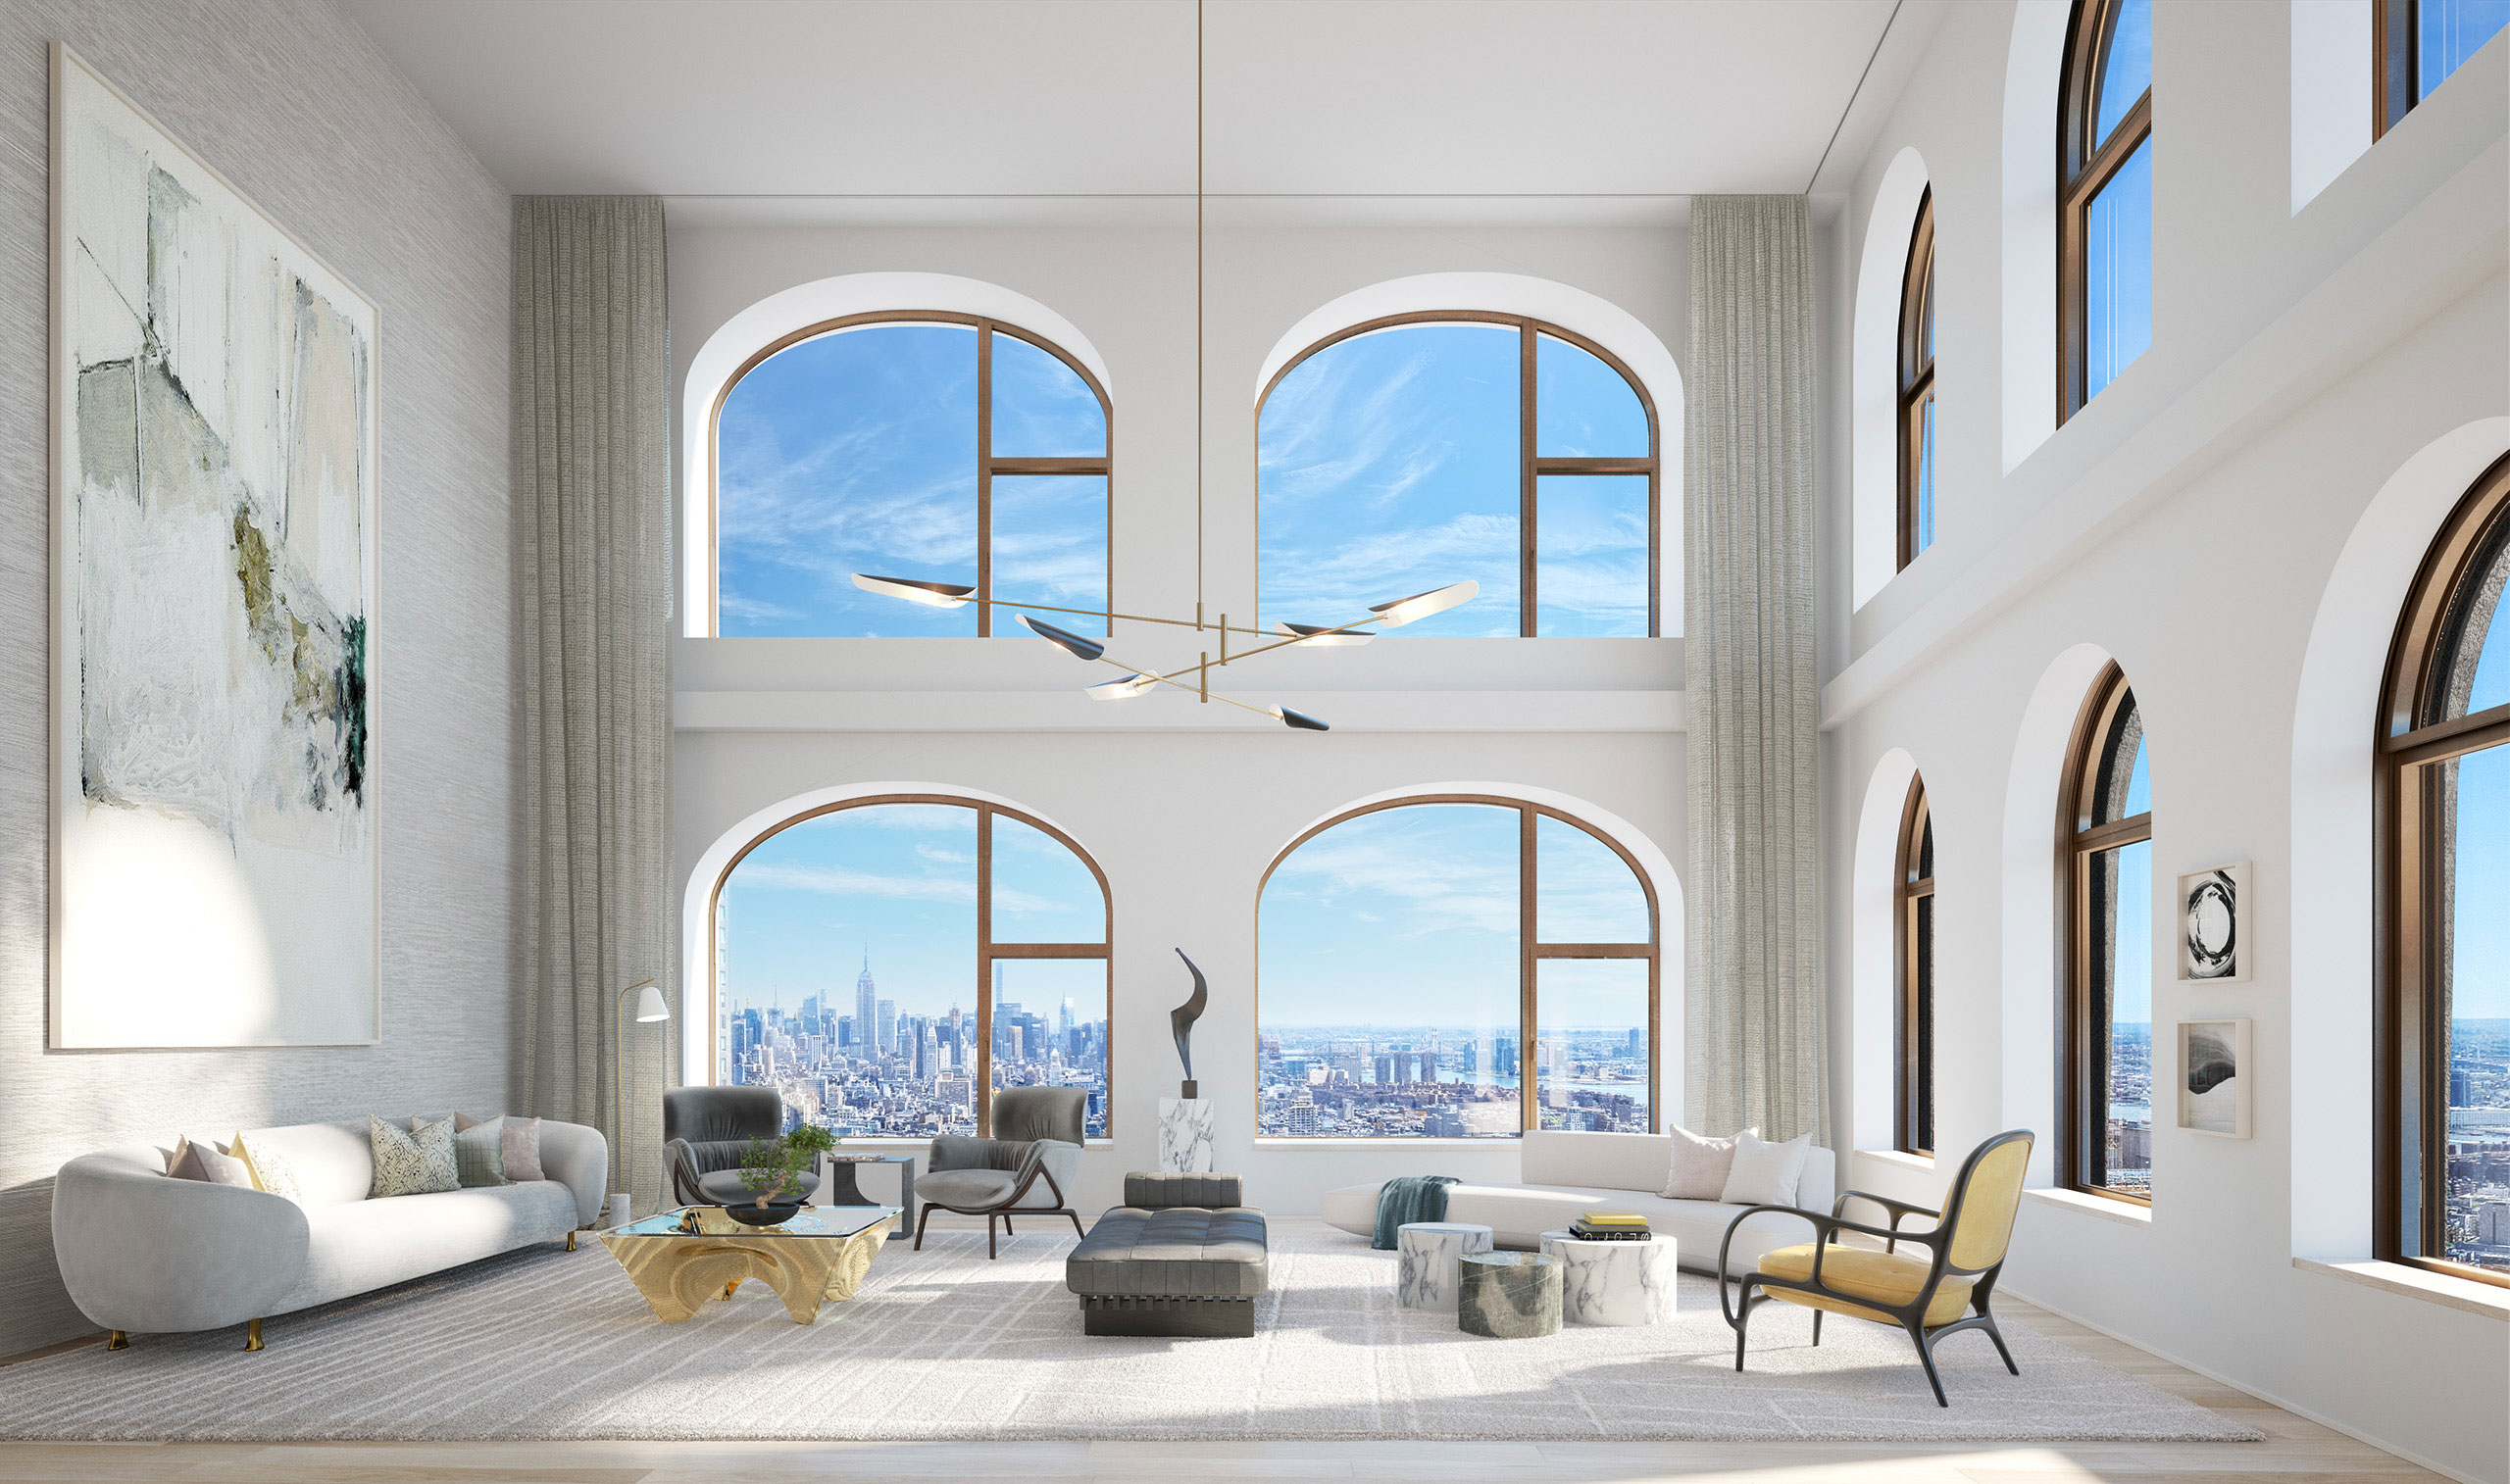 Inside, graceful arched windows afford sweeping views of the city.